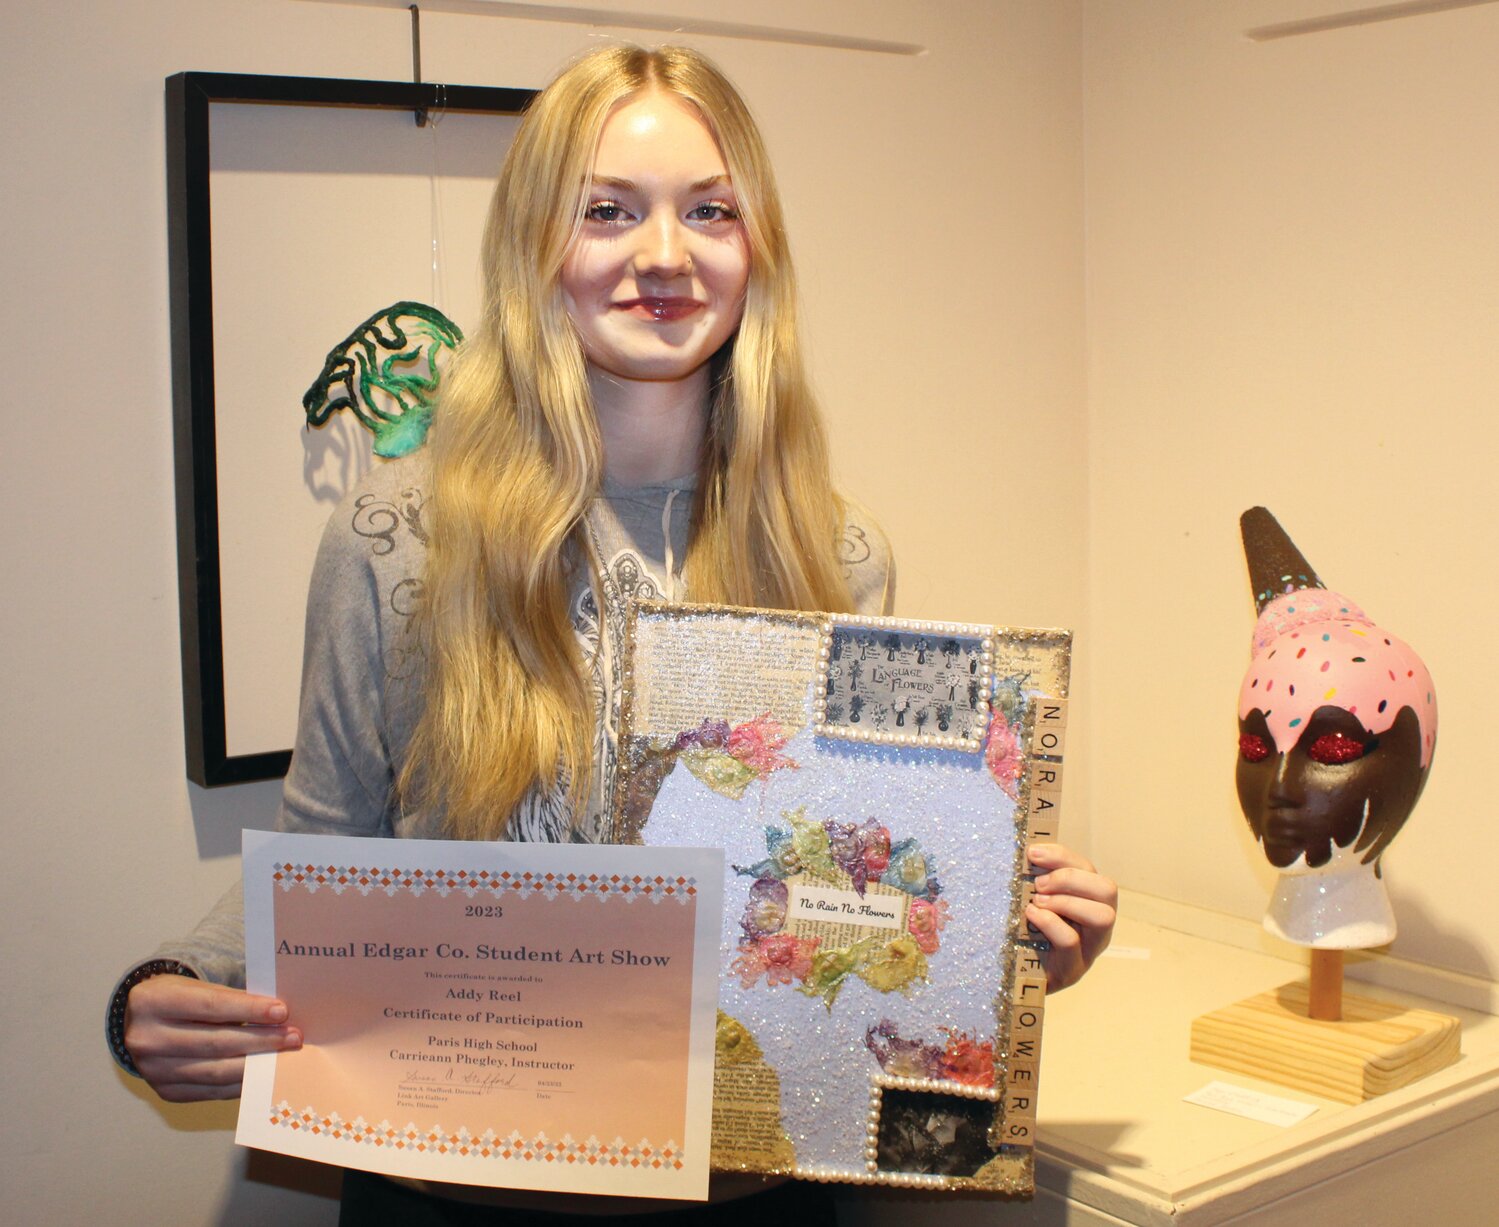 Addy Reel does not consider herself an artist but enjoys how art offers a way to express herself. Her two-dimensional work was selected for showing in the 2023 Student Art Show at The Link Art Gallery.